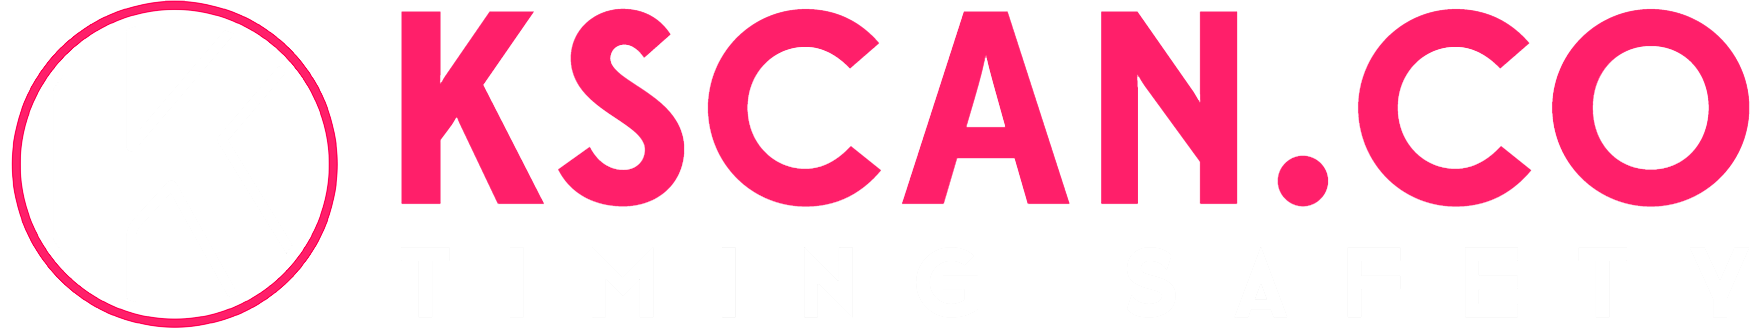 kscan.co - Timing Safety